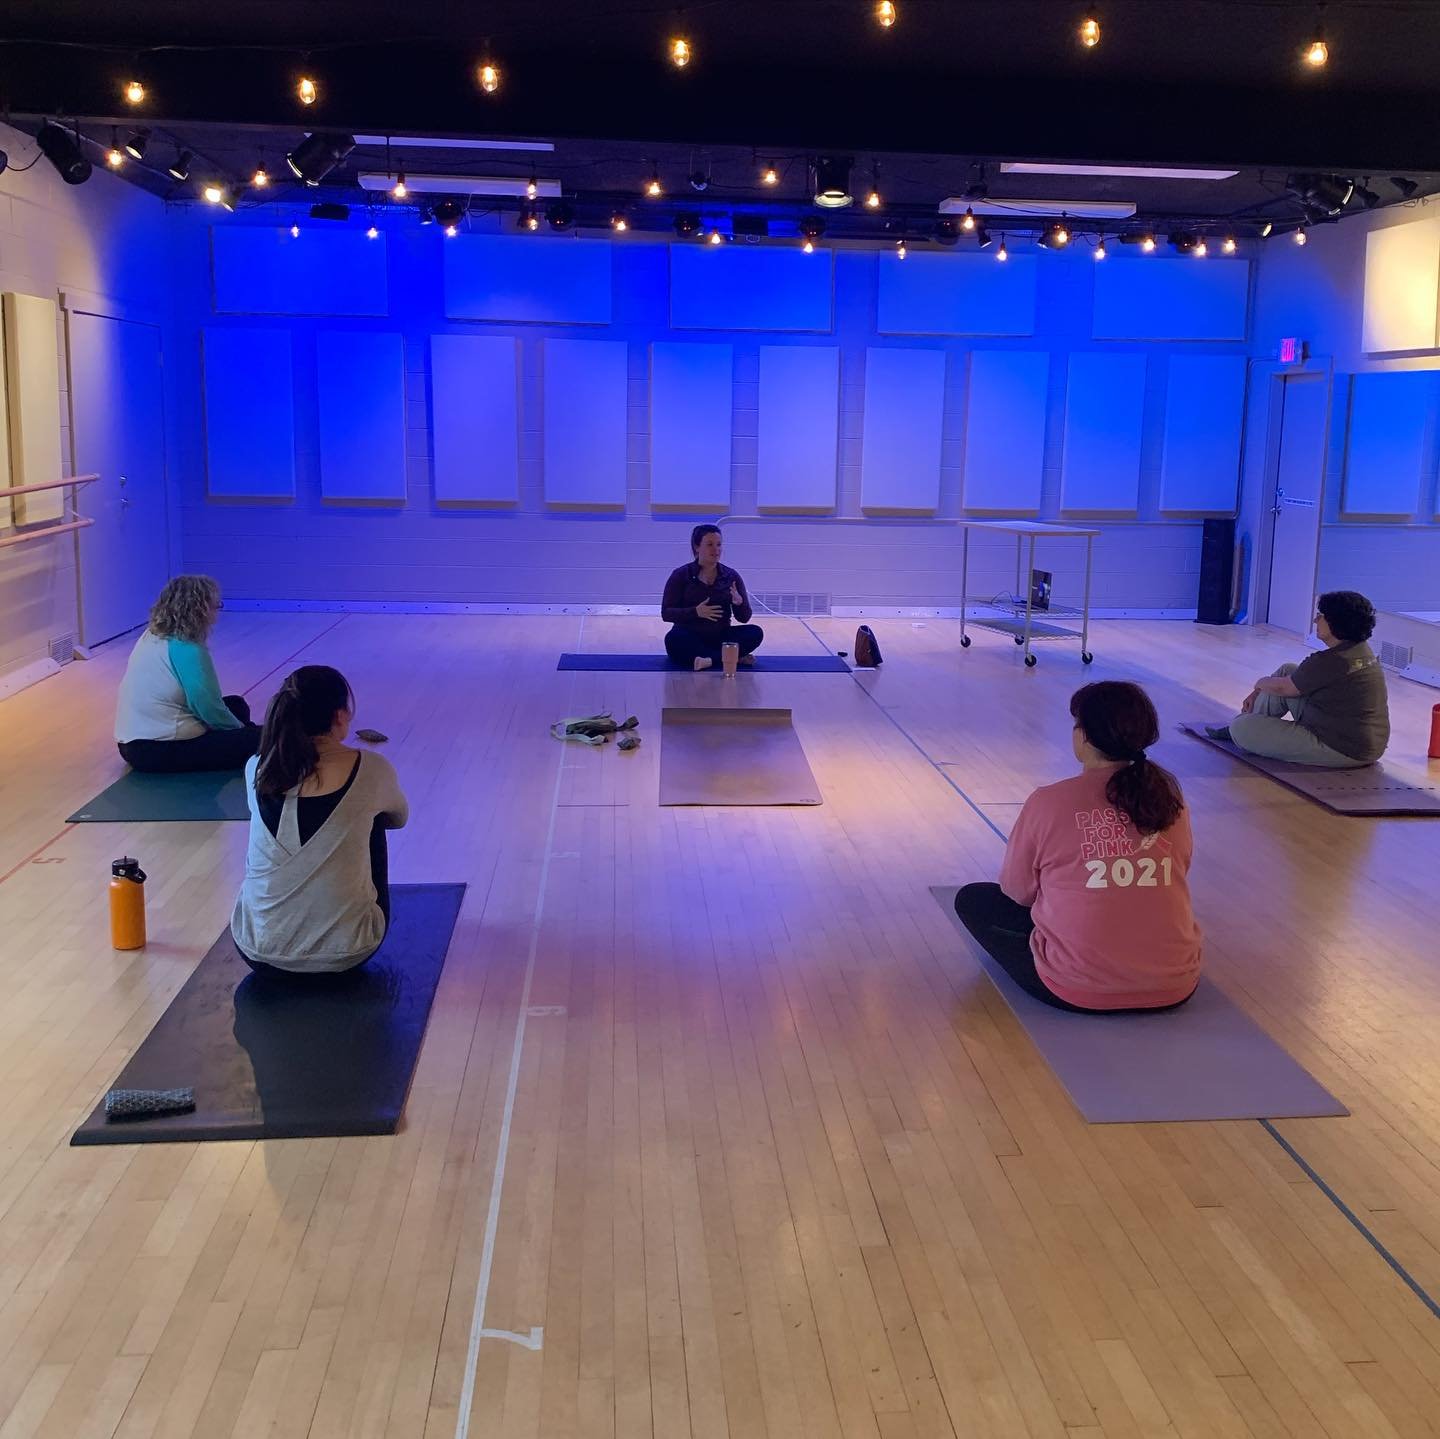 Thank you @sarahw.health for sharing your knowledge and expertise on the digestive system with our community last night! I see many more of these in our future. ✨

#fridayafterworkyoga #embodiedbodies #somayoga #hathayoga #thinkindianolafirst #worrie